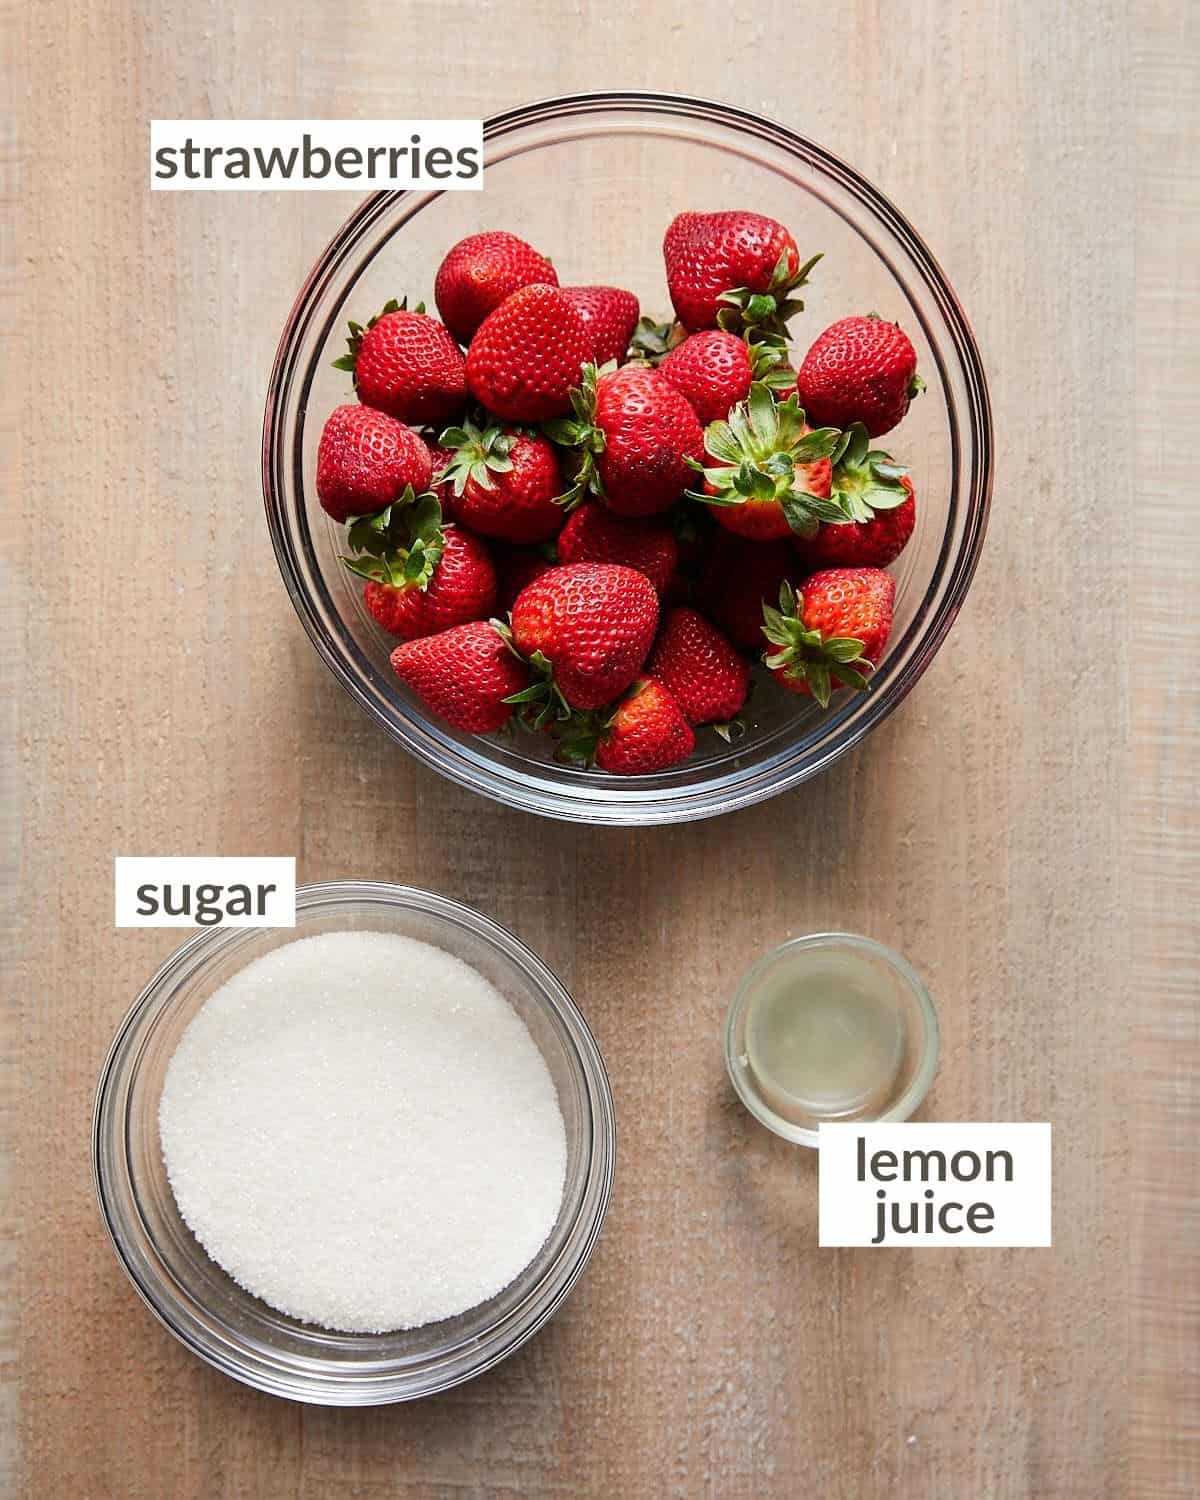 Shows the ingredients needed for strawberry jam recipe in glass bowls. 